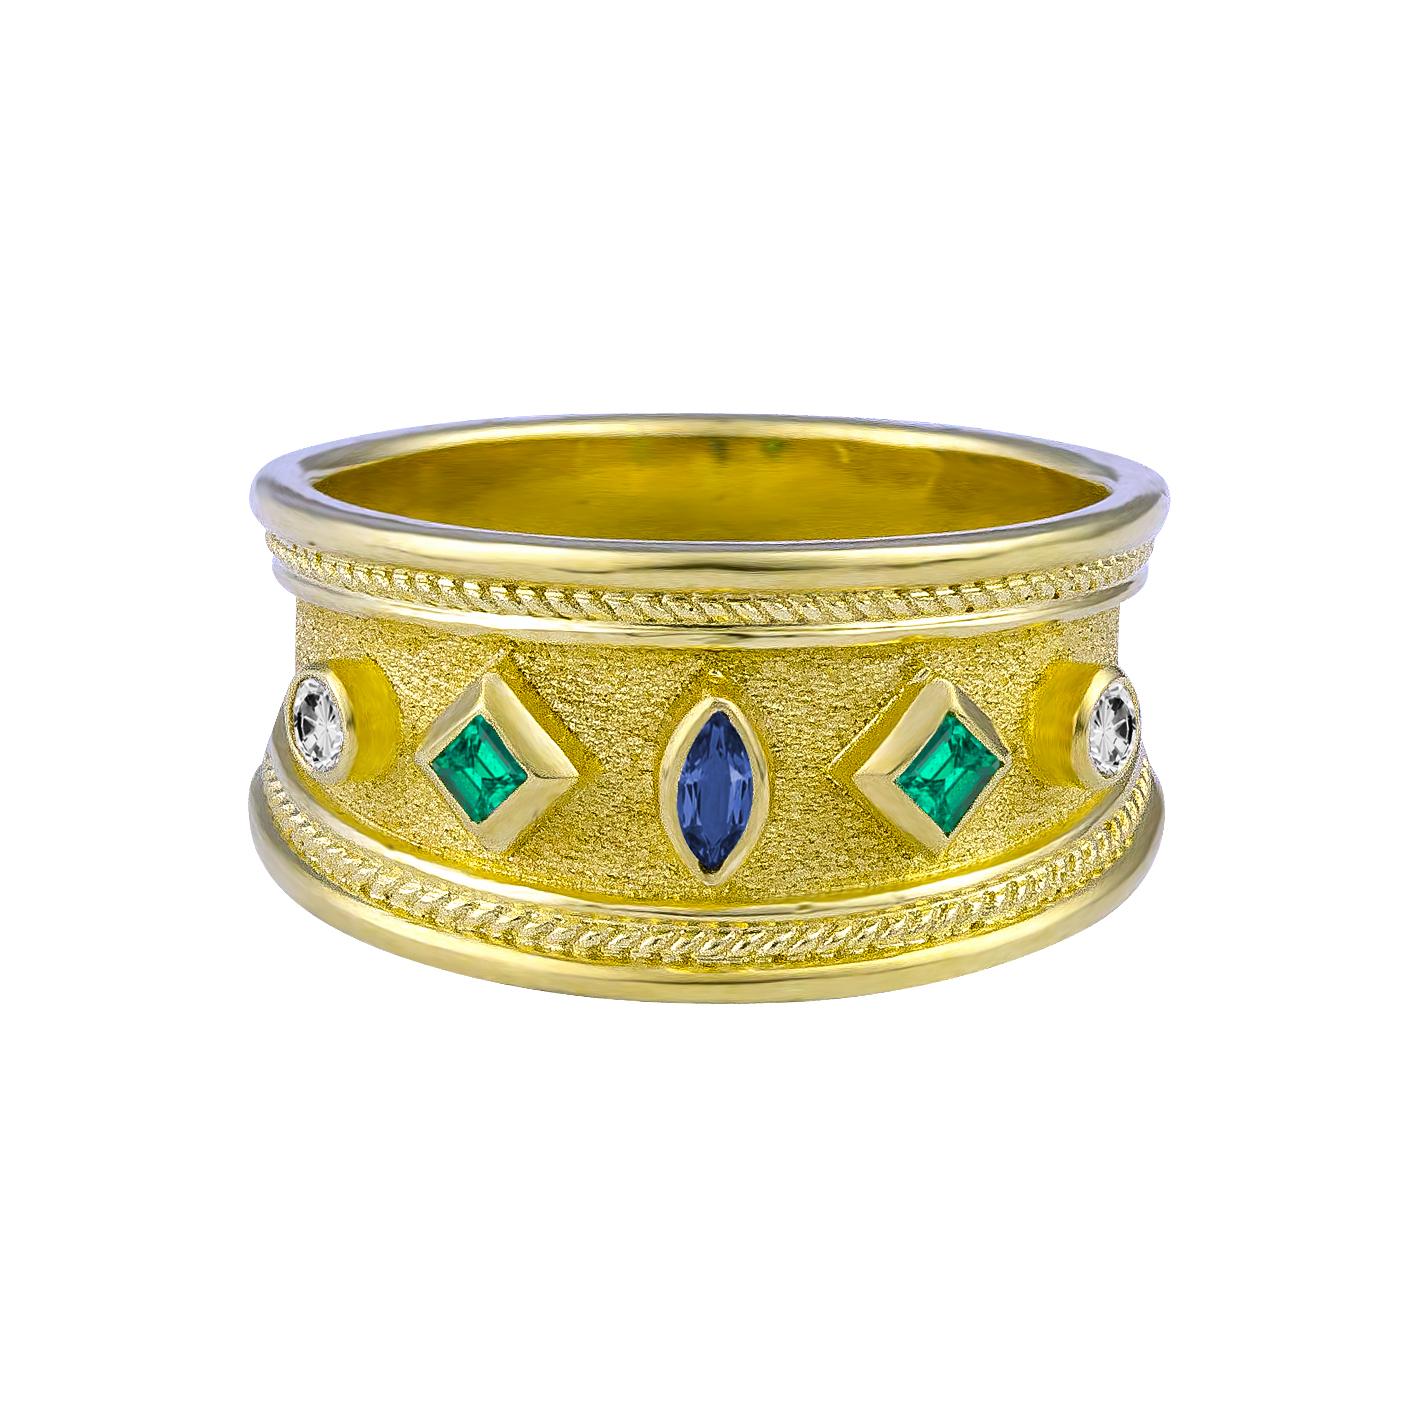 S.Georgios designer 18 Karat Solid Yellow Gold Ring all handmade with Byzantine granulation workmanship and a unique velvet background. The ring has a center 0.10 Carat Marquise Sapphire, 2 Emeralds total weight of 0.15 Carats and 2 Brilliant cut